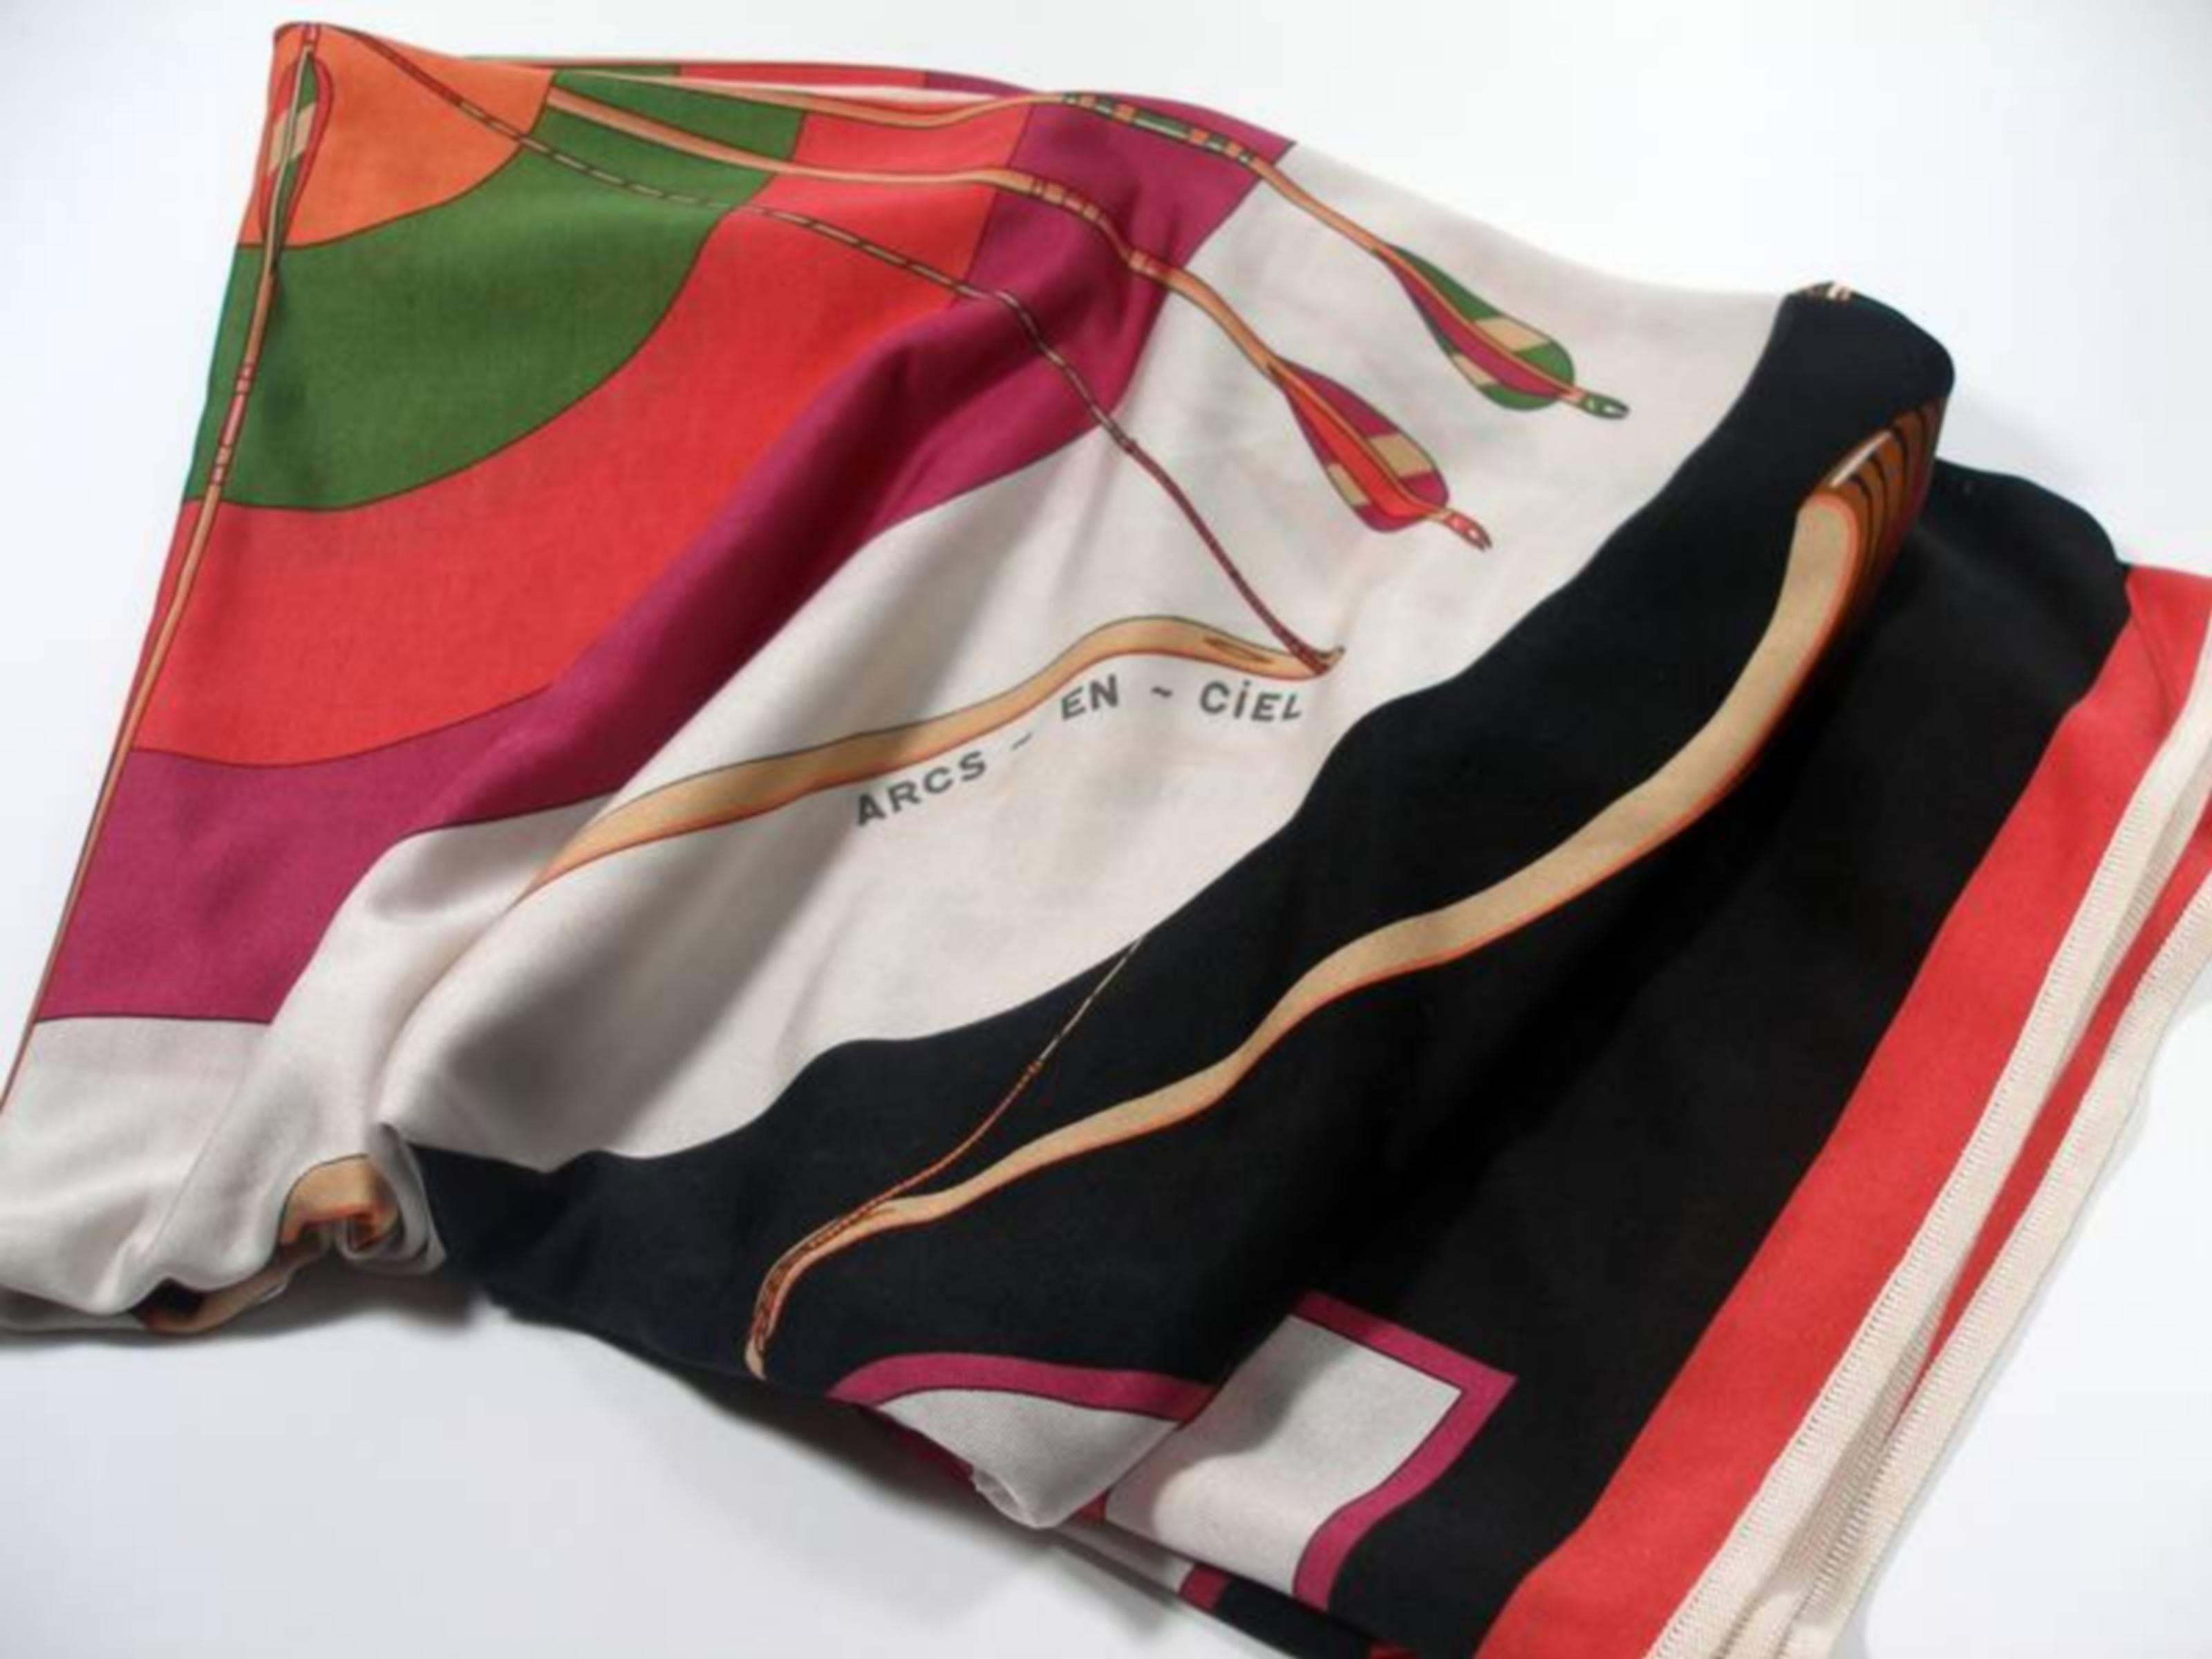 Luxurious jersey ( fluide ) Scarf 
Designed by Julia Abadie in 1980 
MADE IN FRANCE by HERMES
Model : ARC EN CIEL
100% Jersey silk
Edition 2012 
Good condition 
Its comes with Hermès shopping bag and ribbon 
INTERNATIOANALS BUYERS TAXES ARE